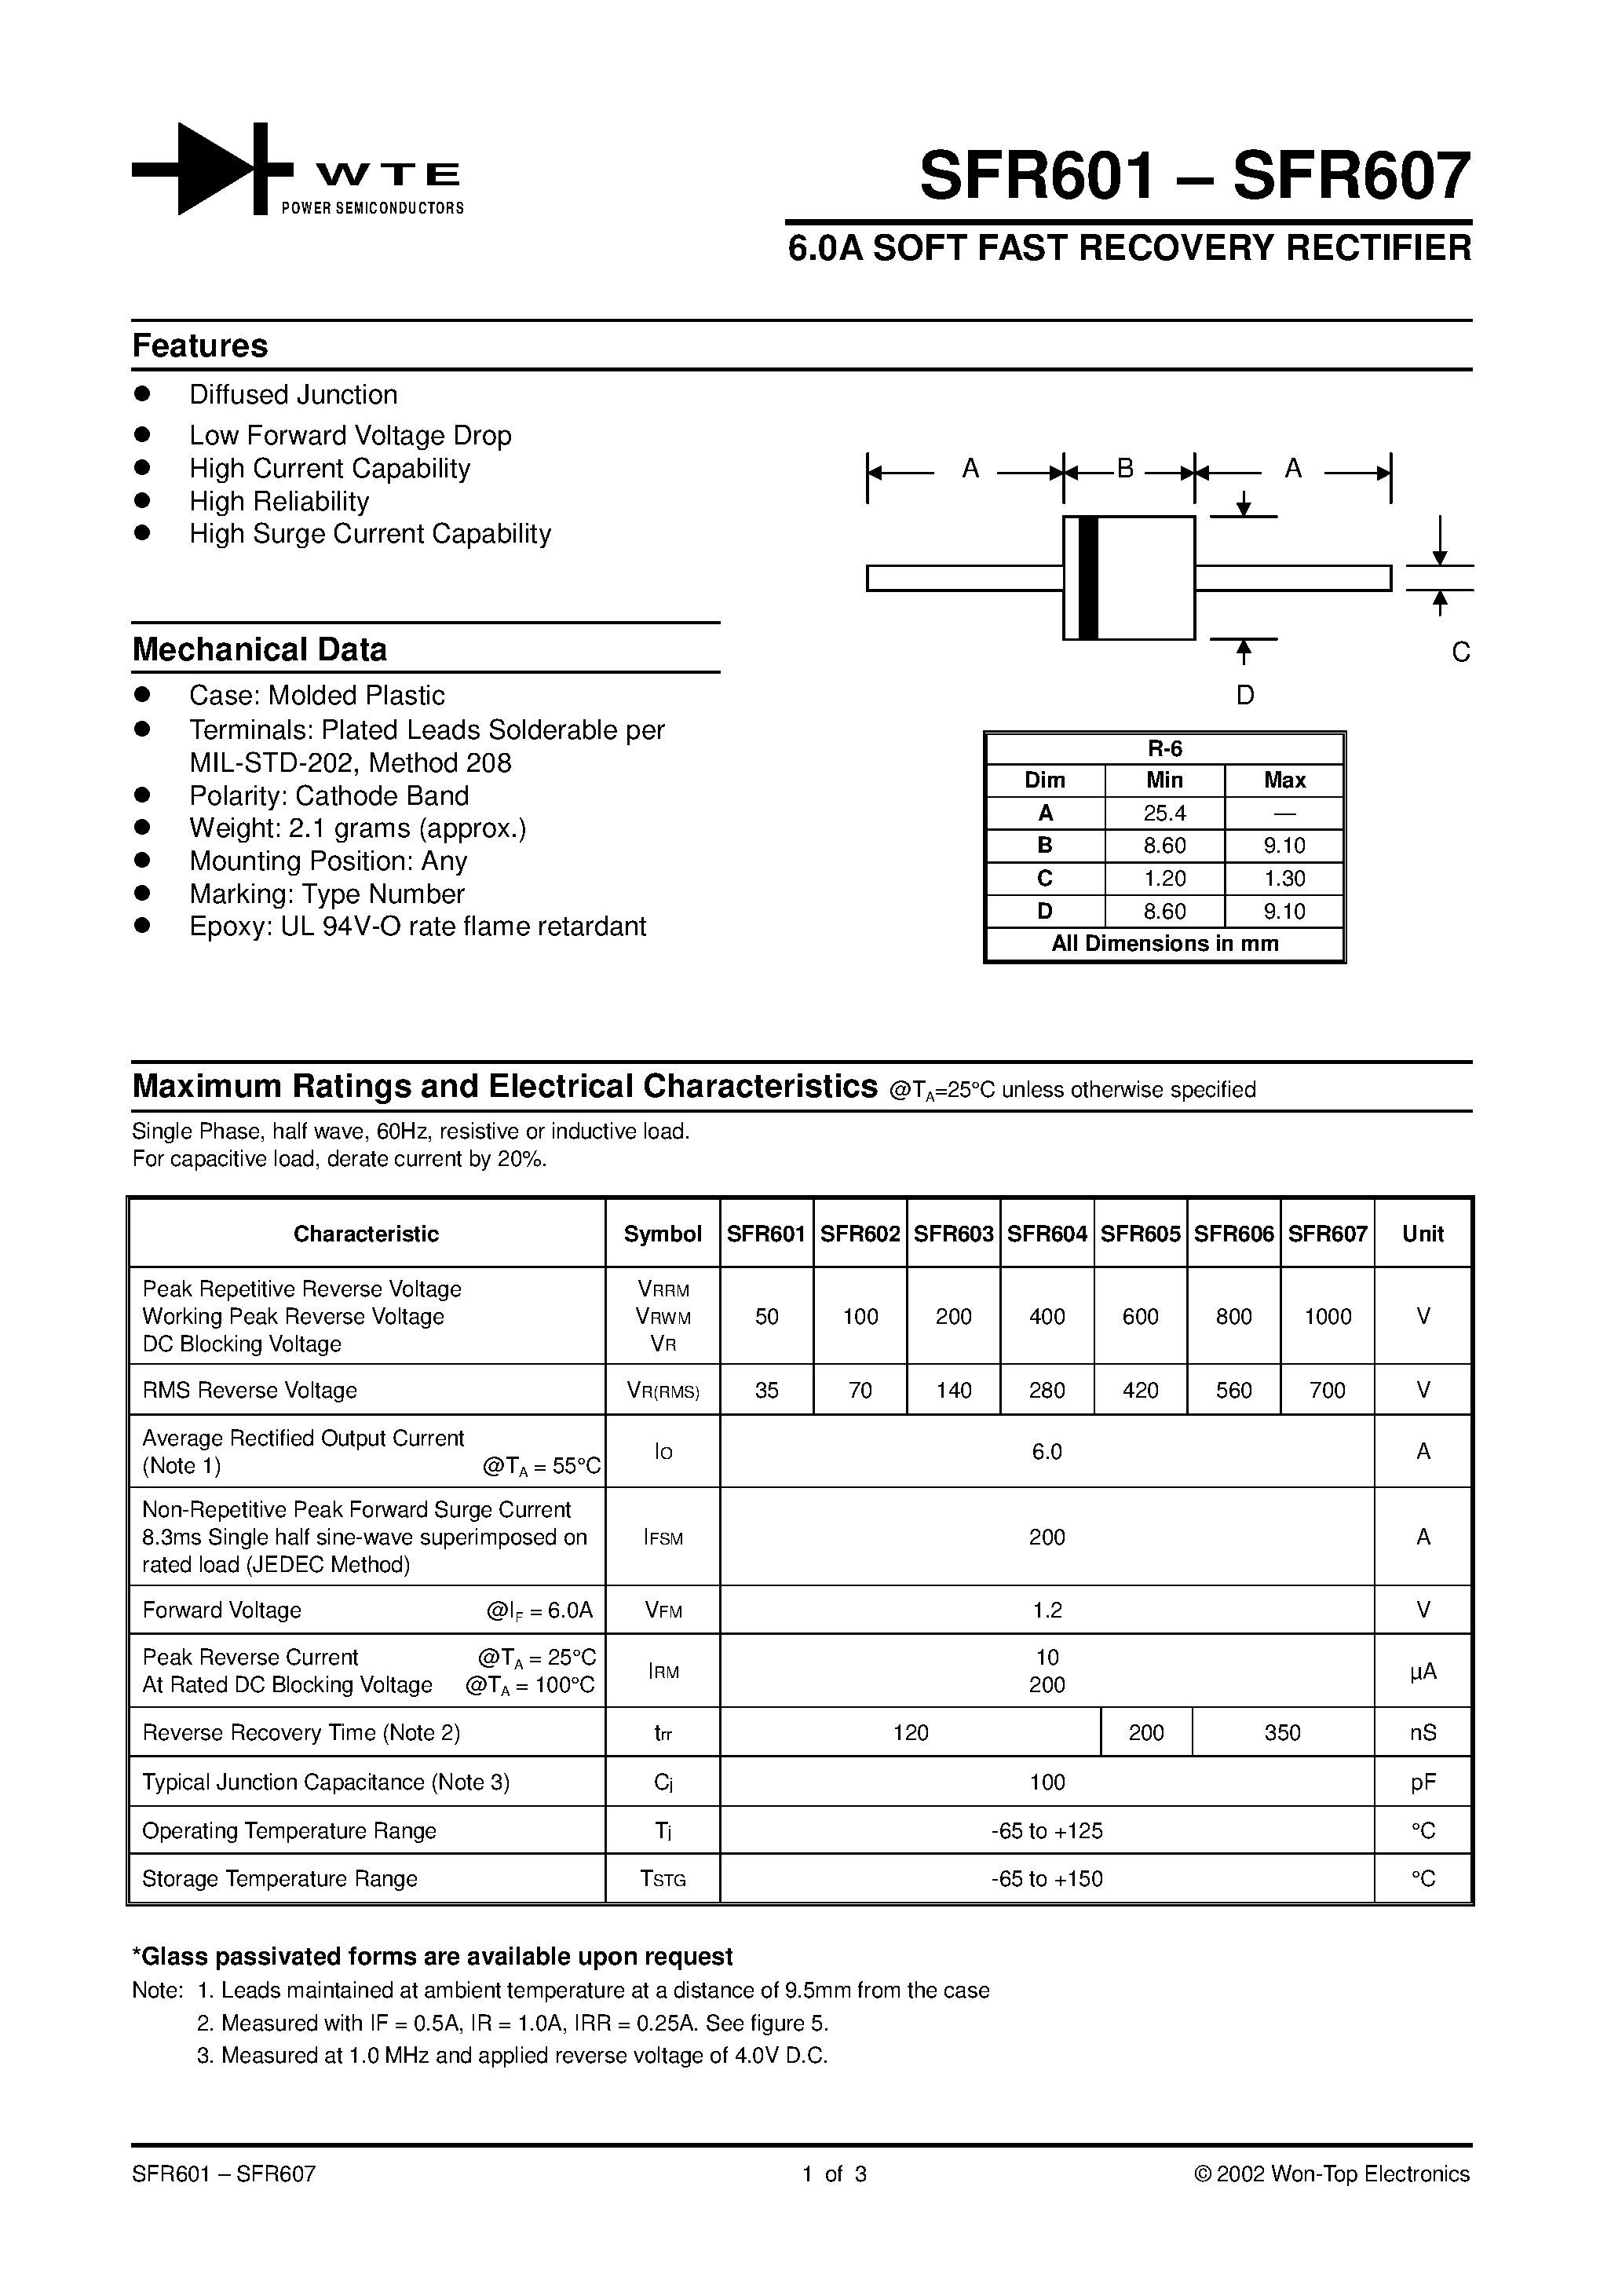 Datasheet SFR601-T3 - 6.0A SOFT FAST RECOVERY RECTIFIER page 1